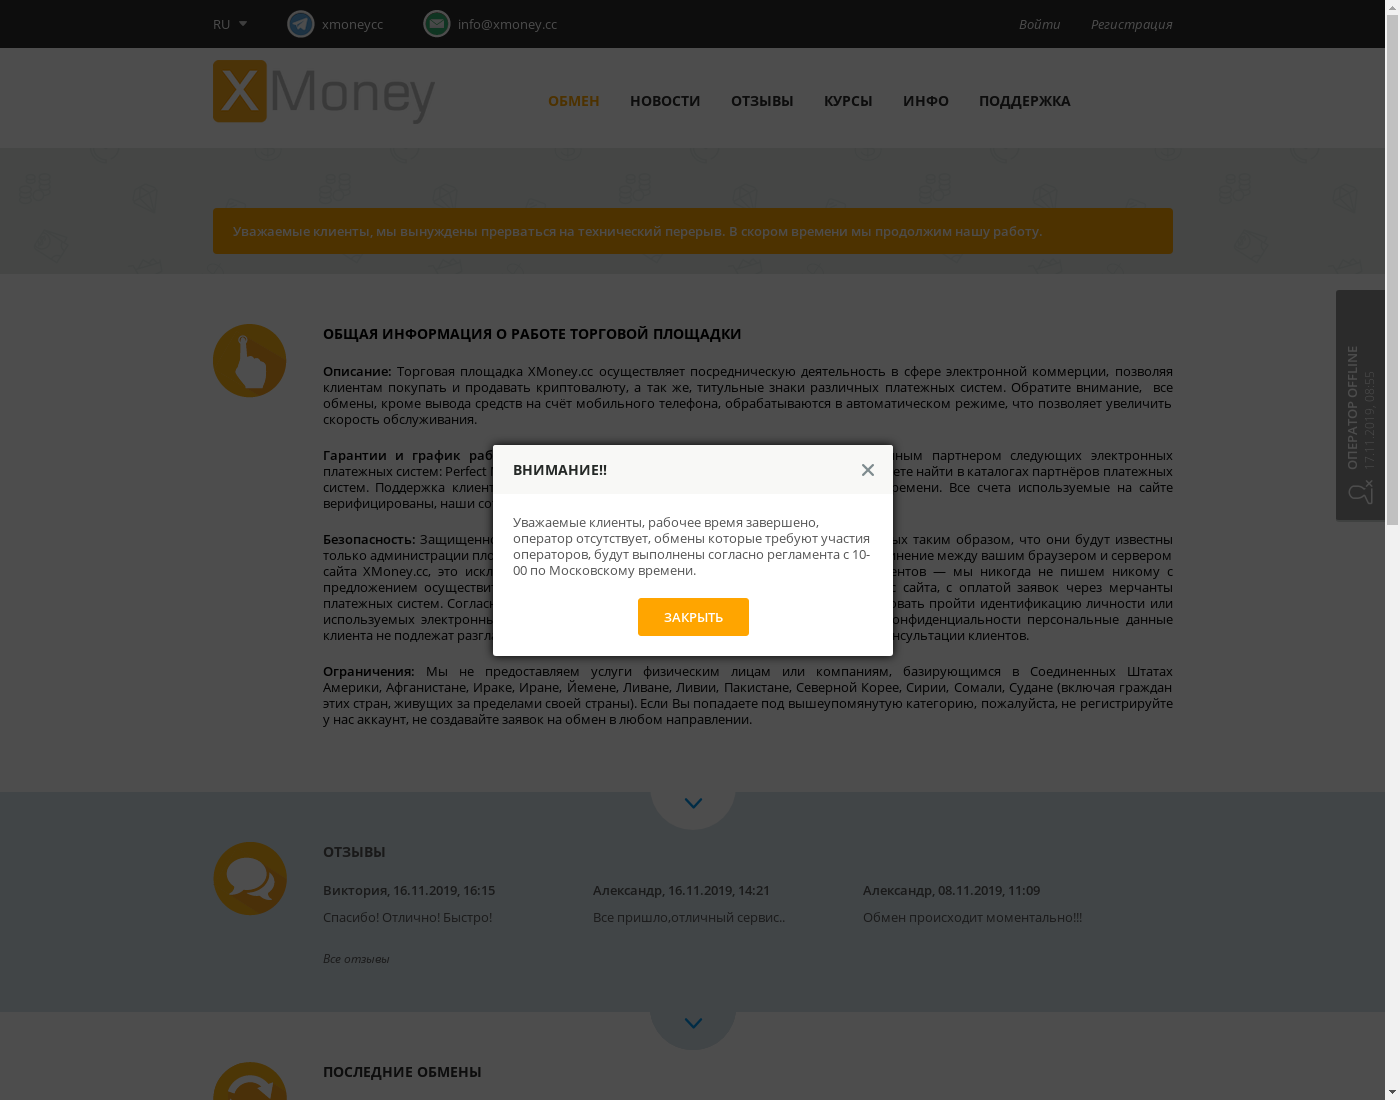 xmoney user interface: the home page in English